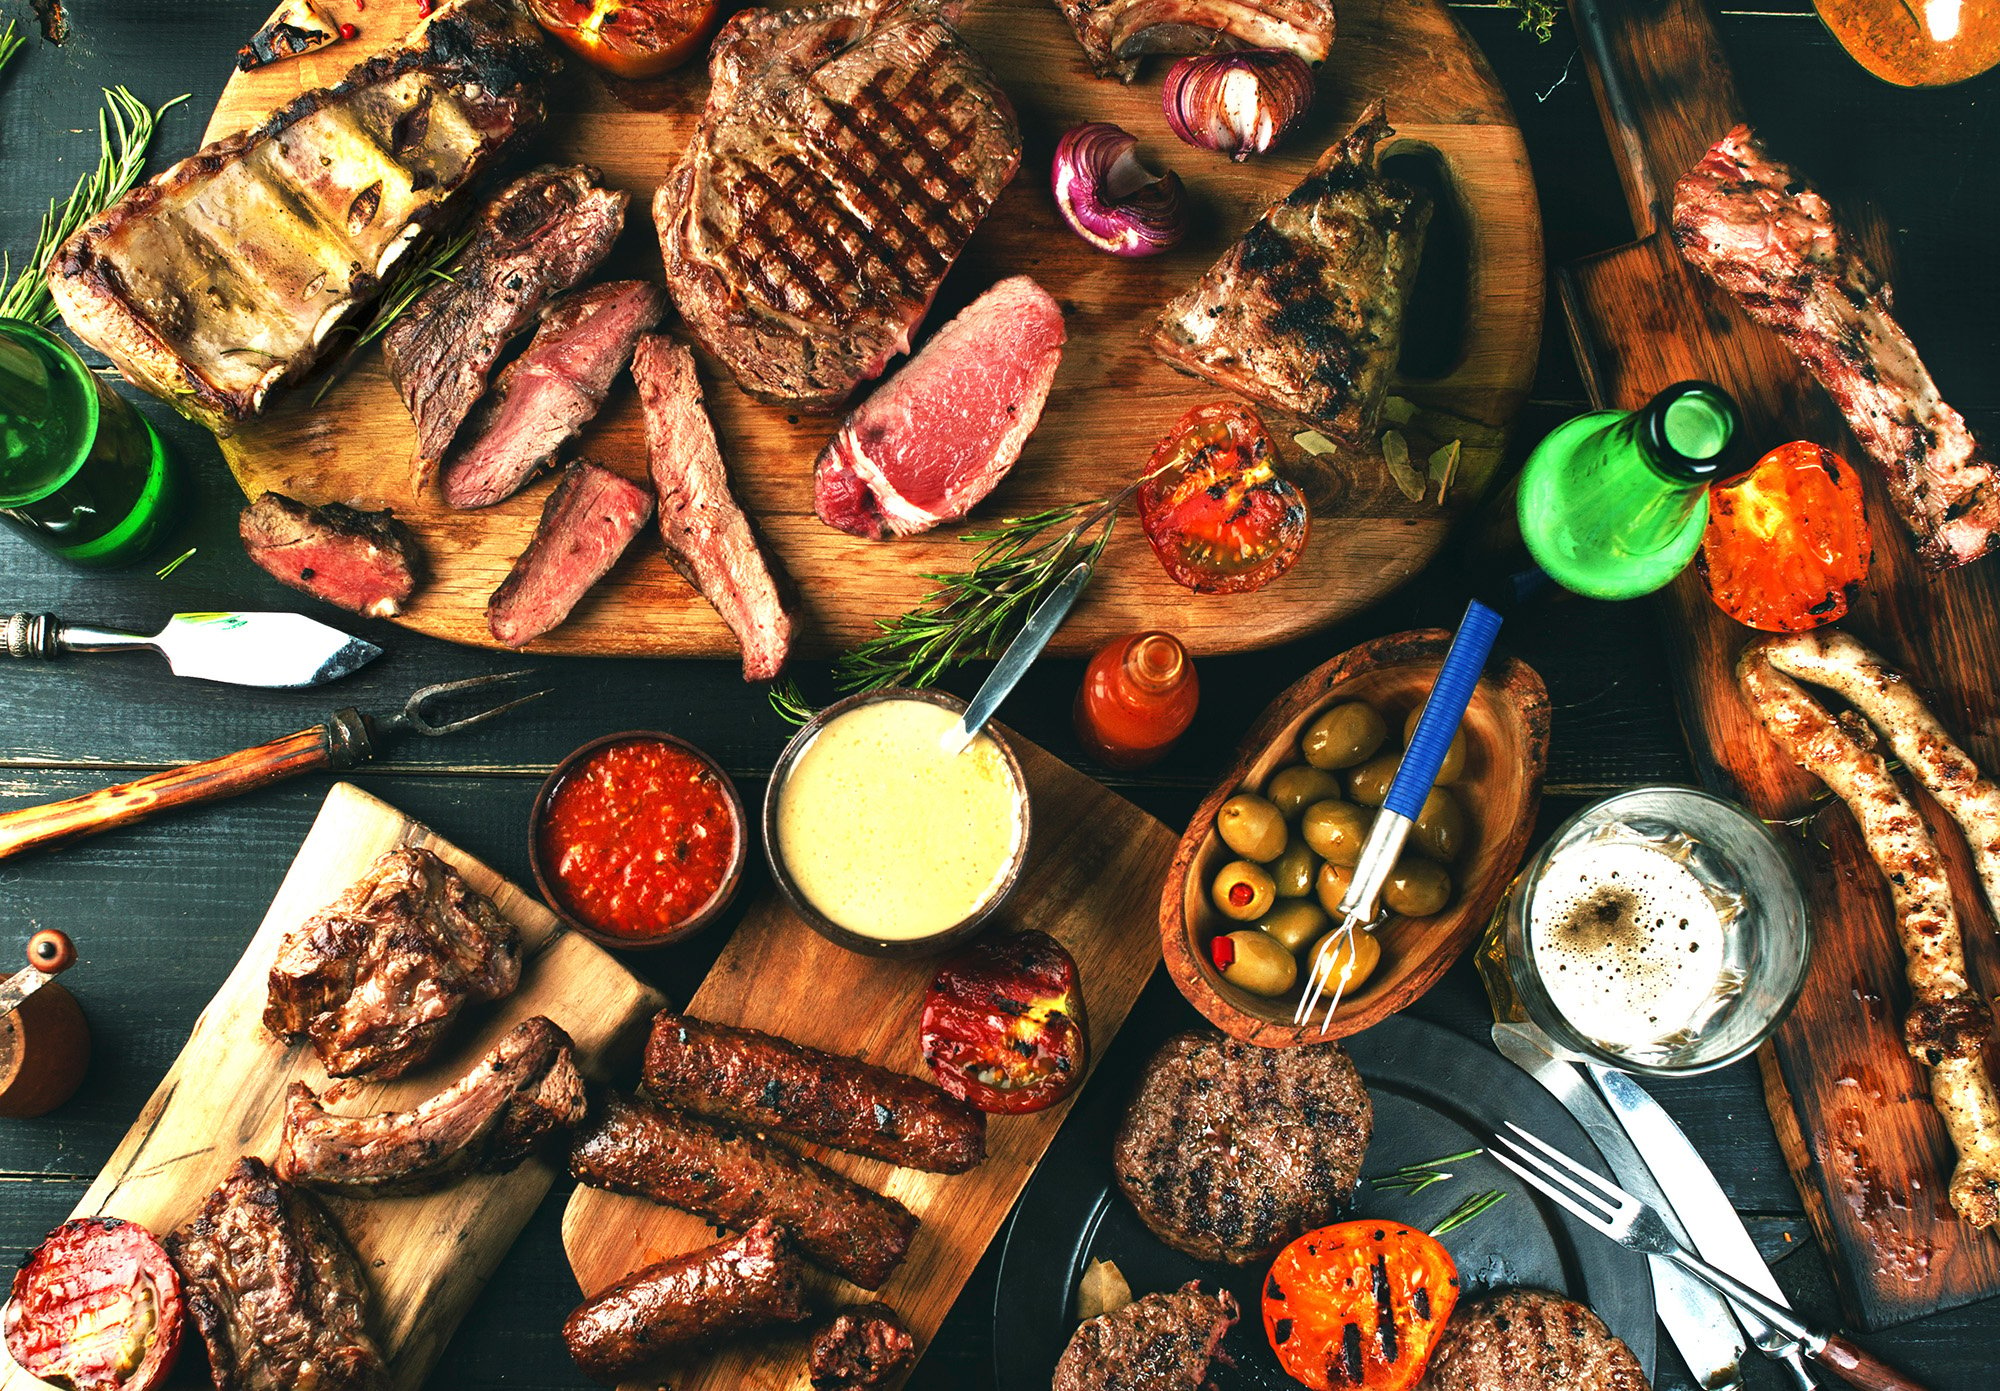 Selection of BBQ food and ingredients on a wooden chopping board